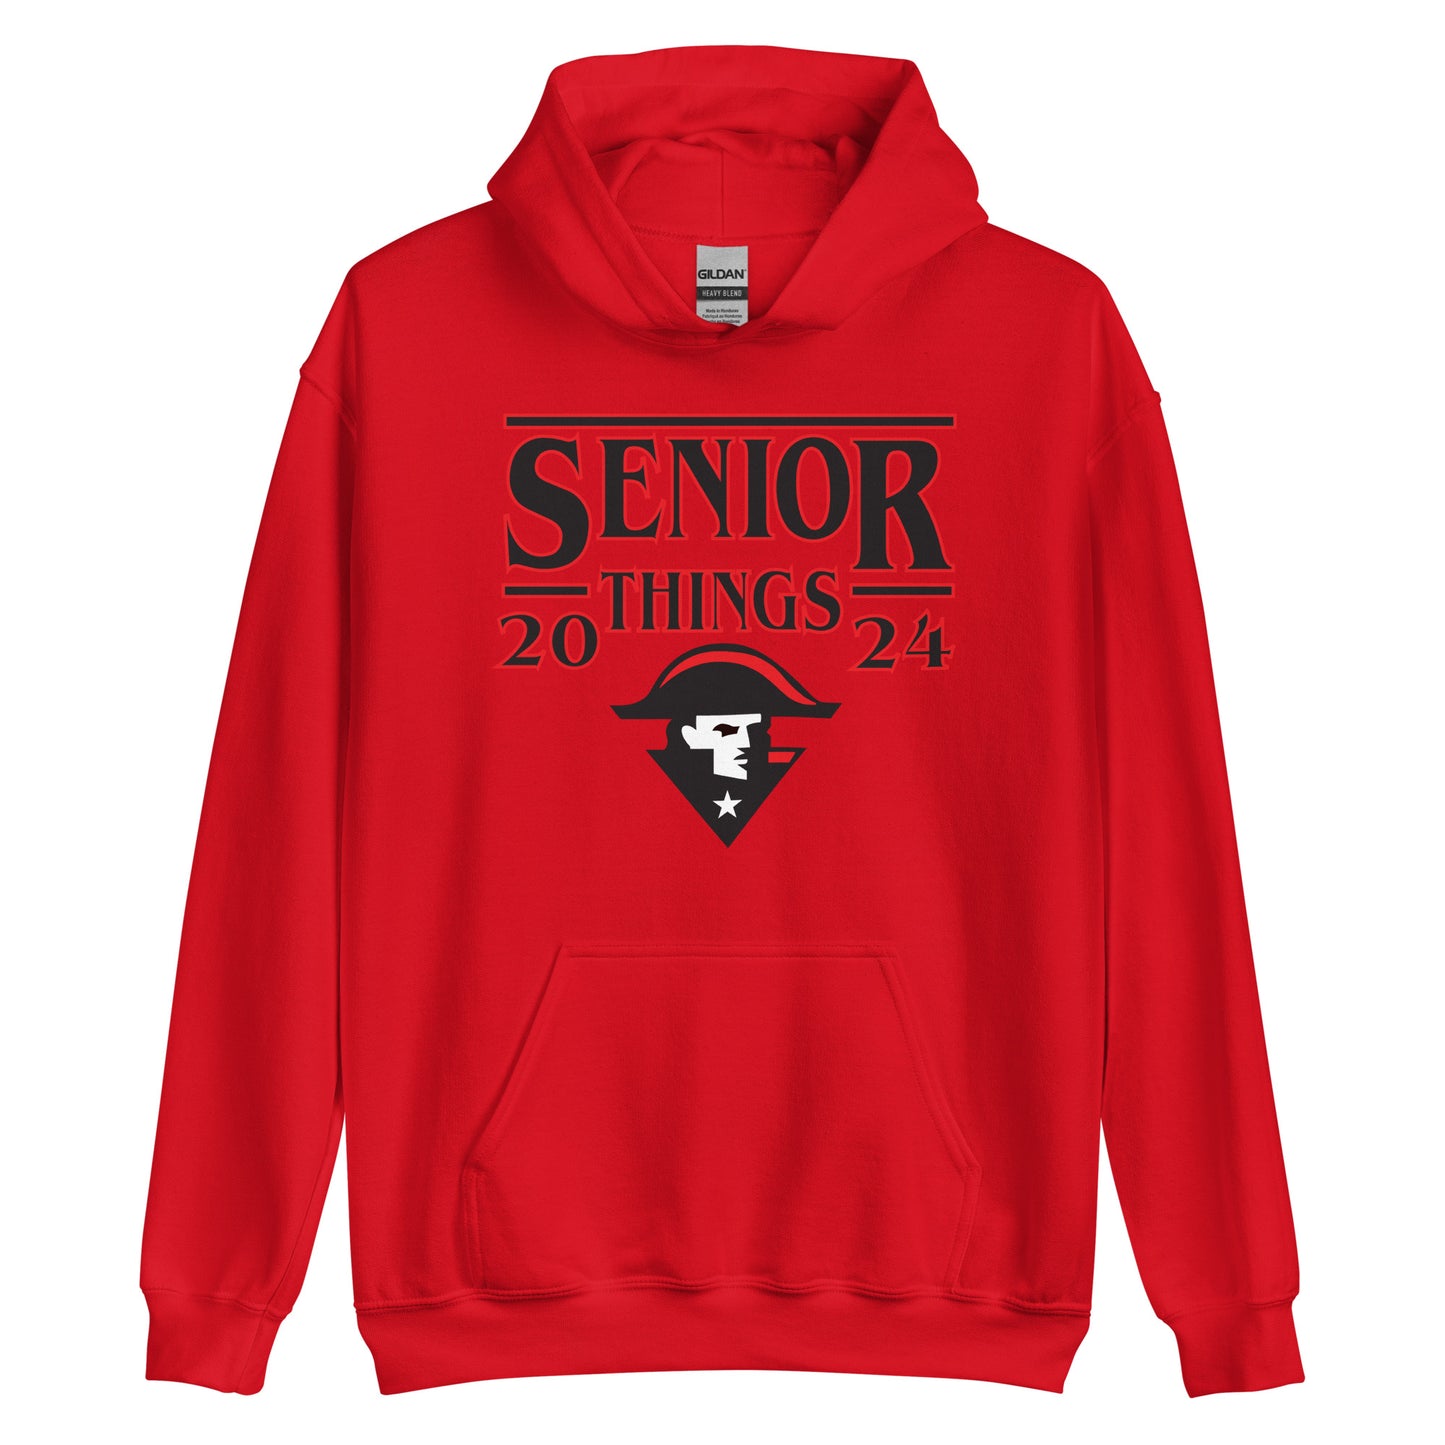 Senior Things 2024 Hooded Sweatshirt - Perry County Central High School